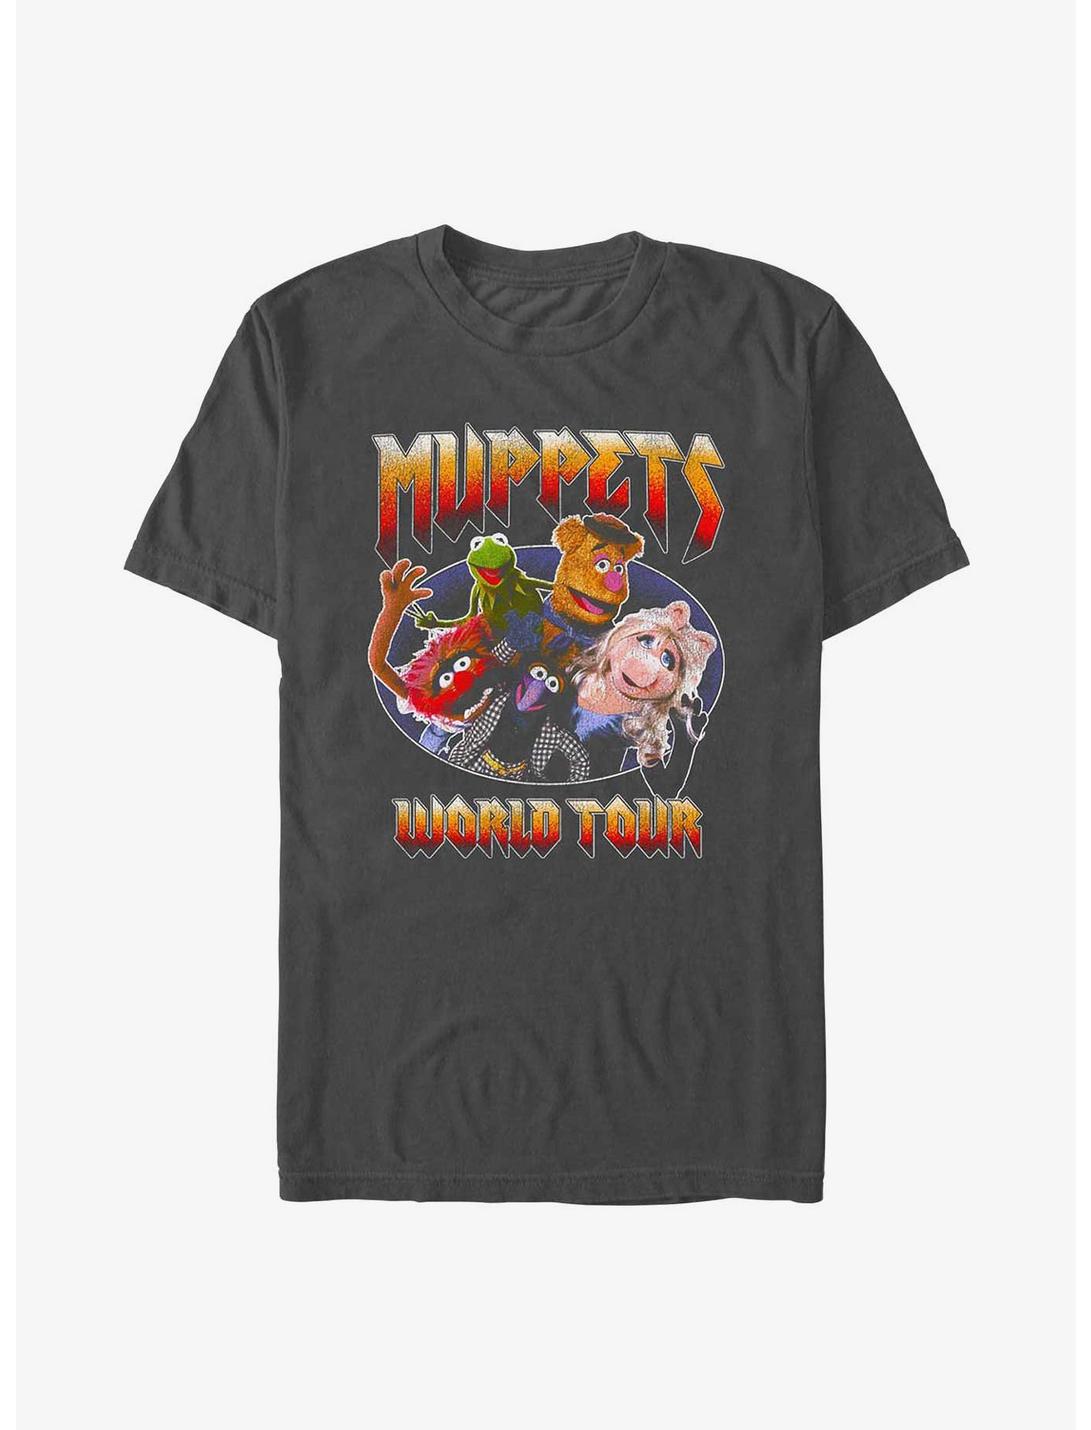 Disney The Muppets World Touring T-Shirt, CHARCOAL, hi-res